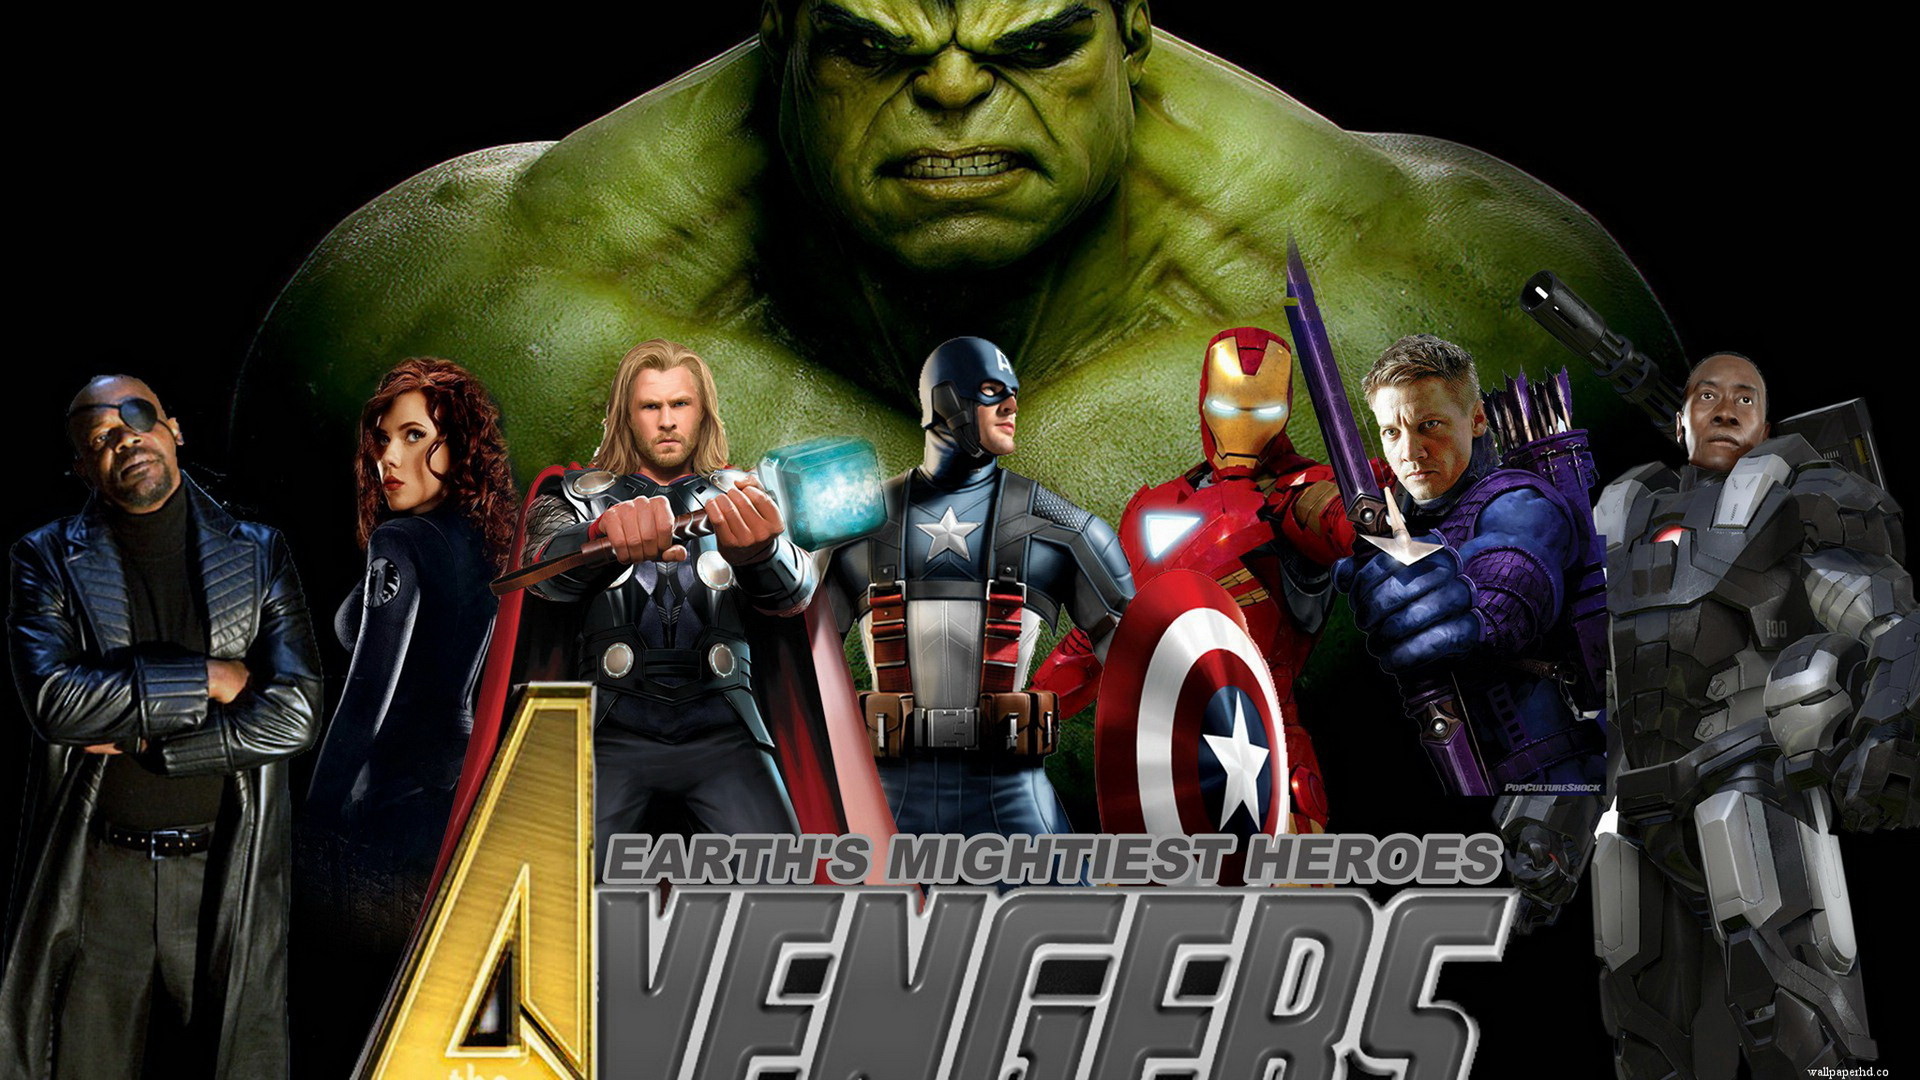 1920x1080 Search Results for “avengers 2 hd wallpapers – Adorable Wallpapers